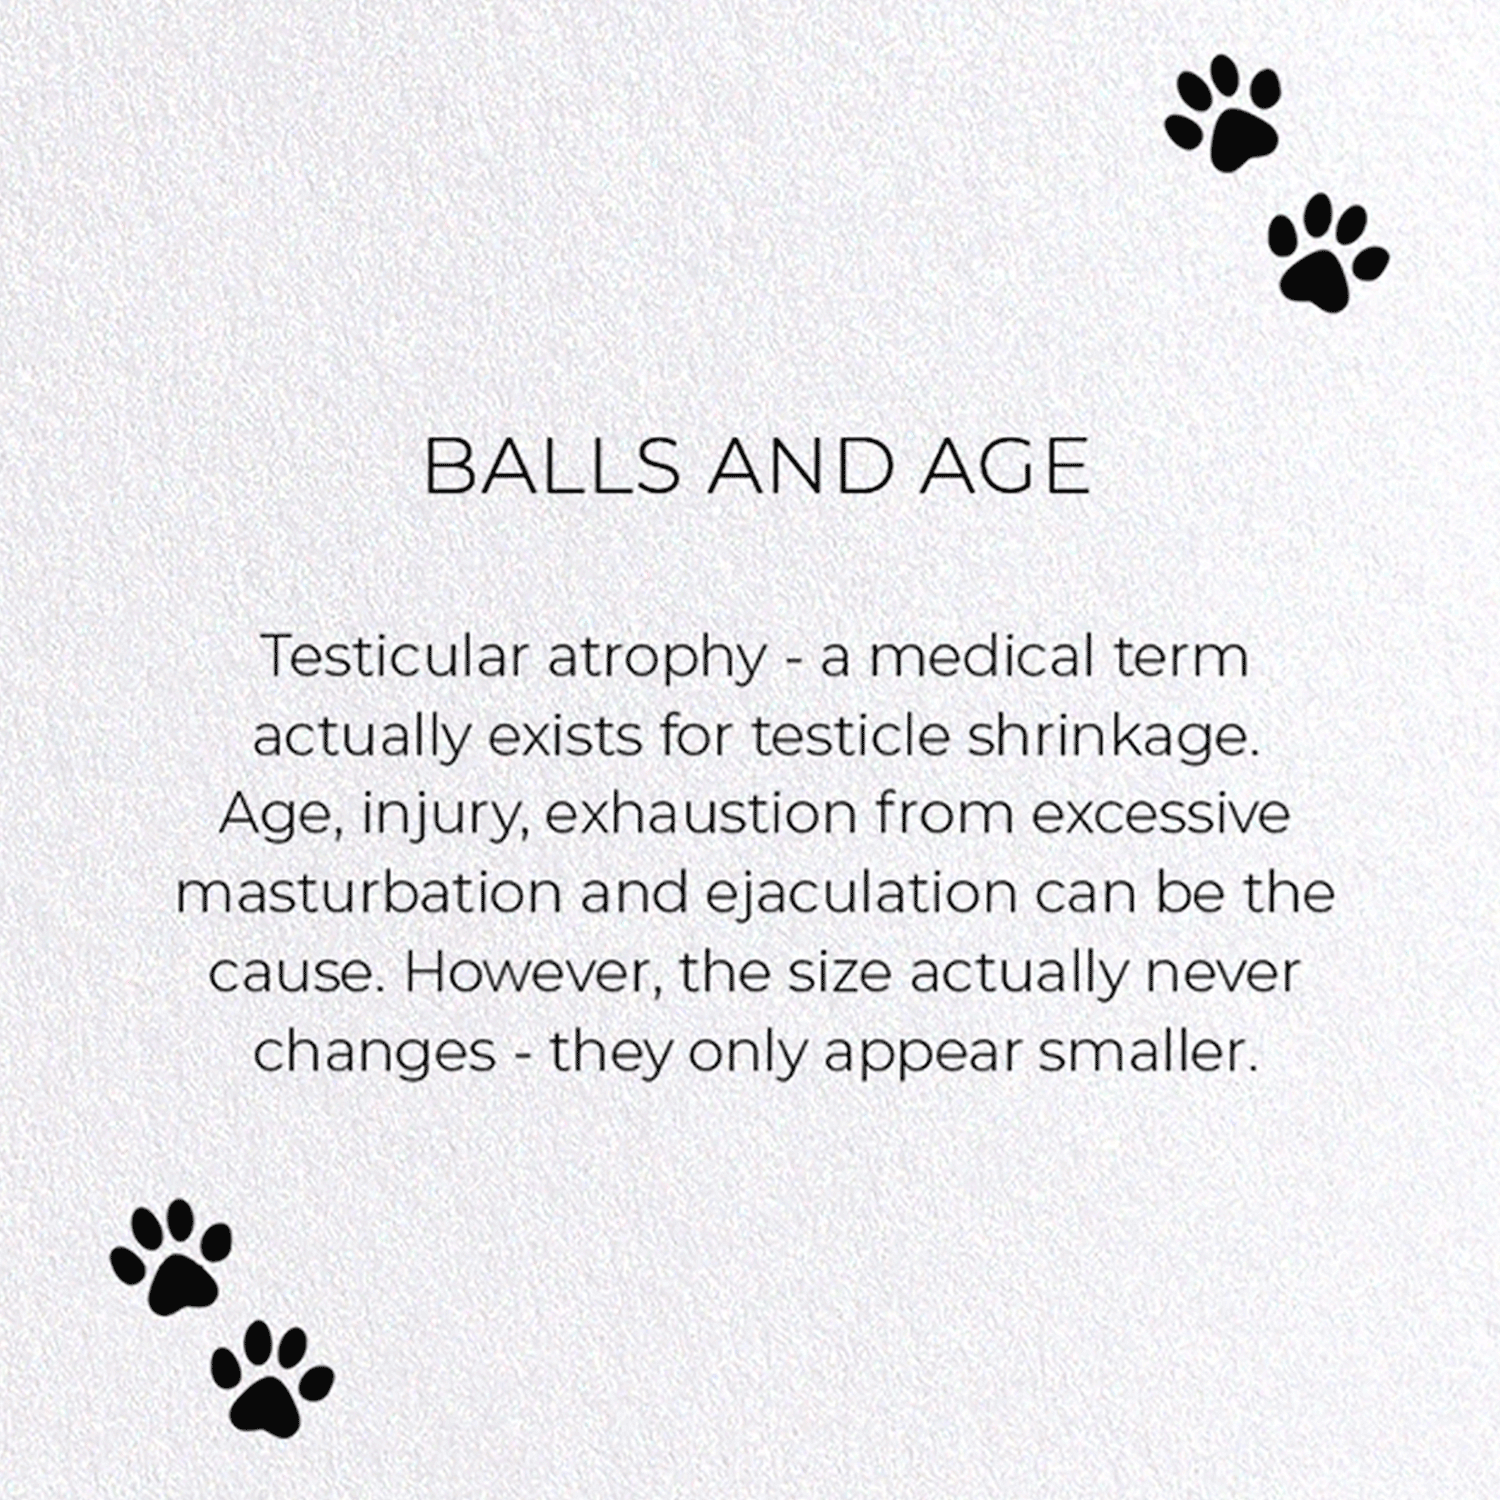 BALLS AND AGE